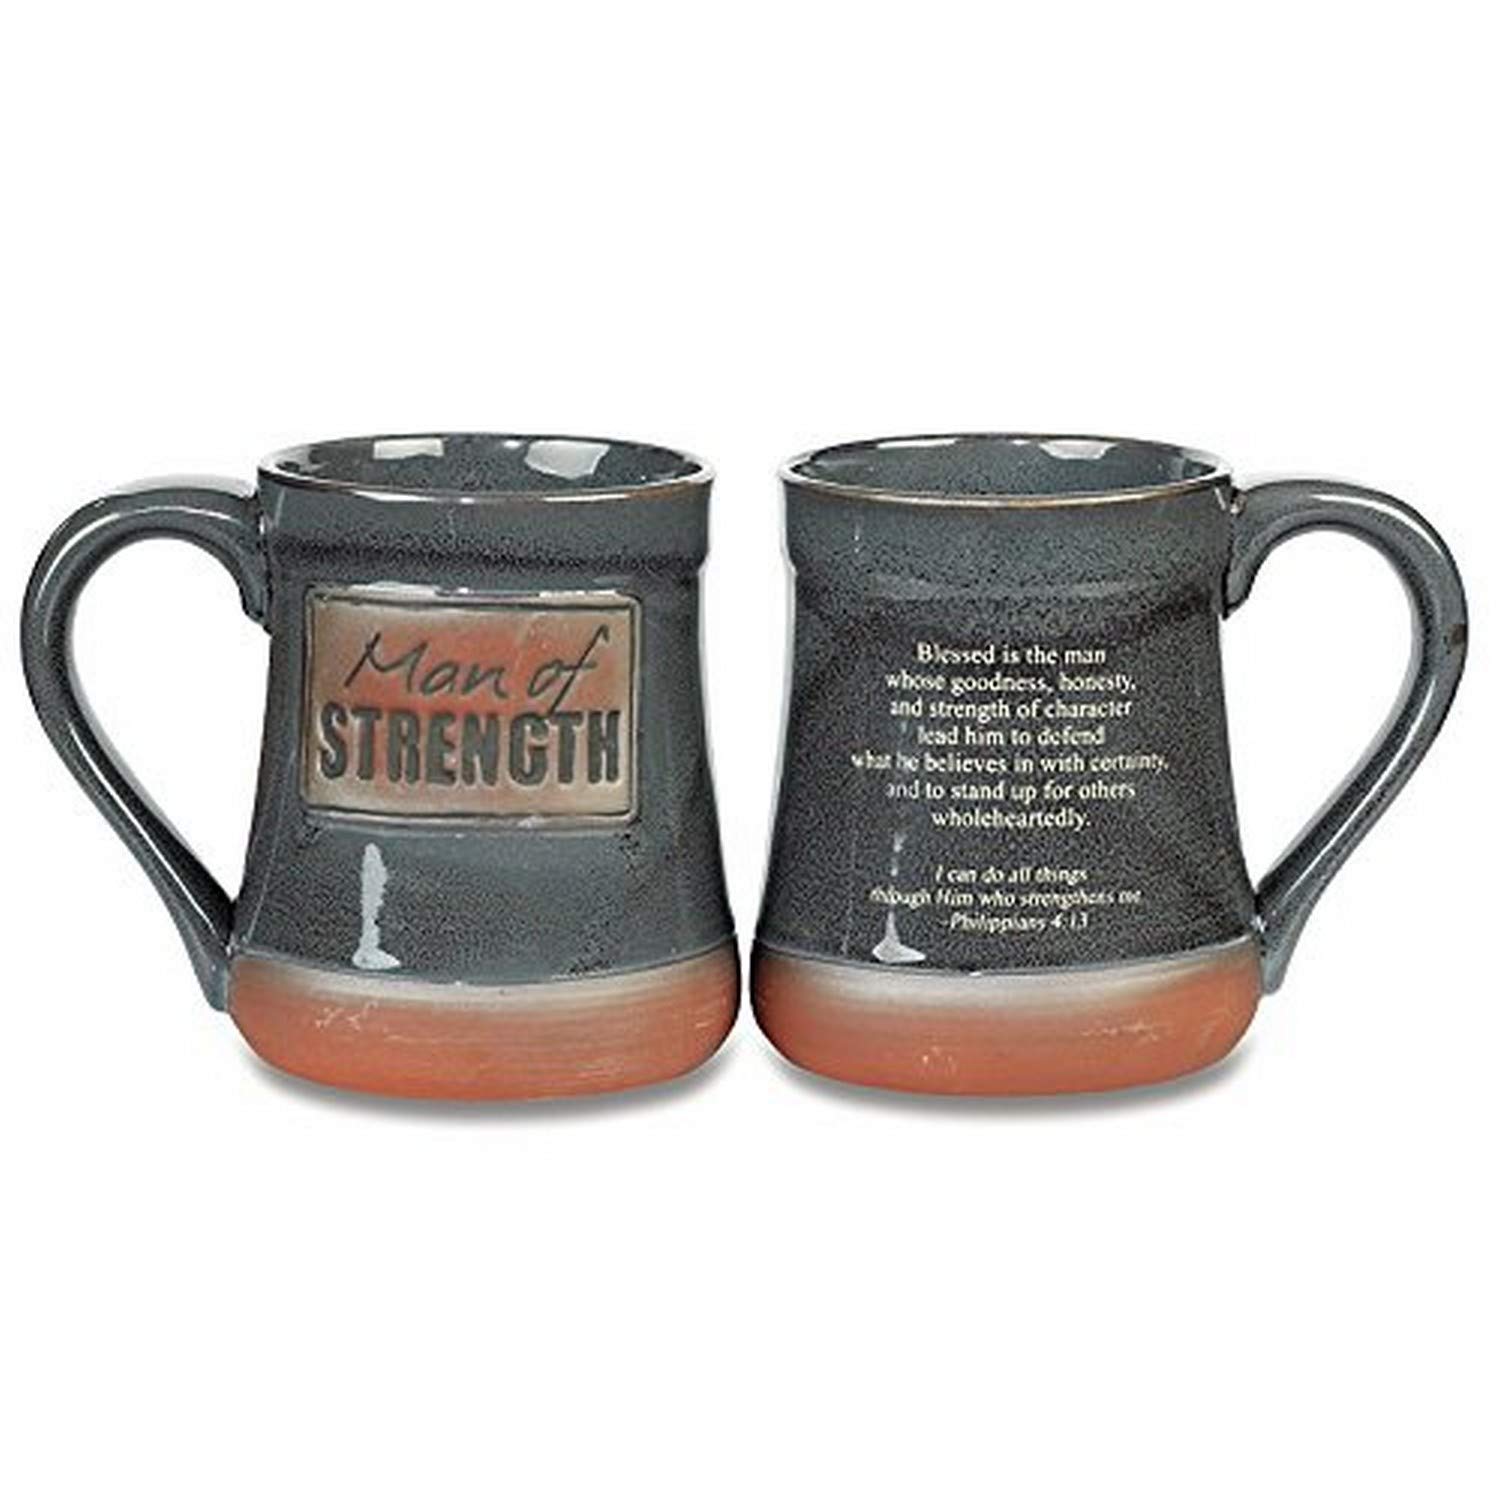 Abbey Gift (Abbey & CA Gift Man of Strength Pottery Mug, Grey, 20 oz, 1 Count (Pack of 1), Gray